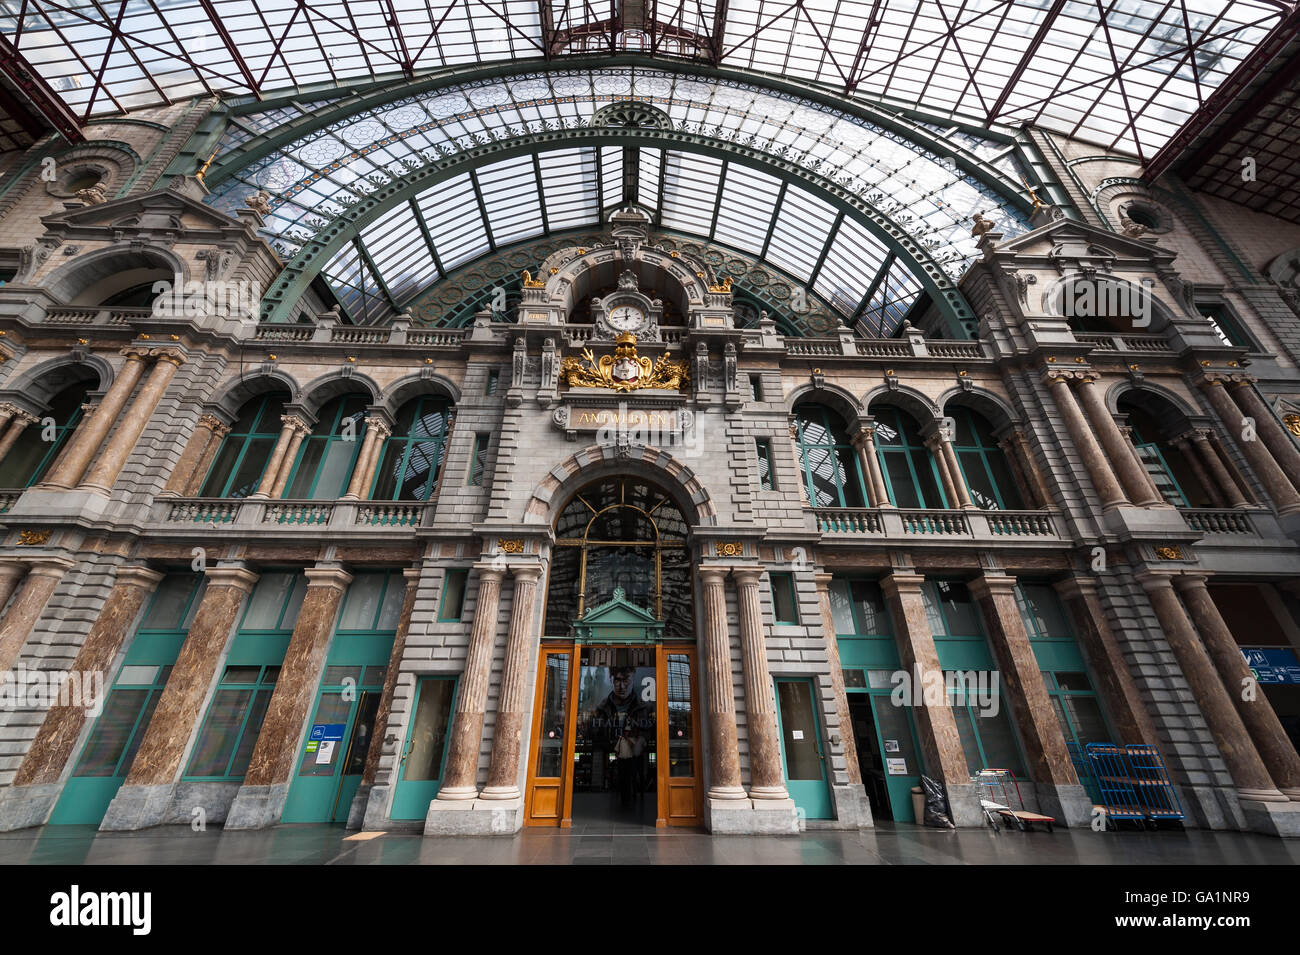 Antwerp, Netherlands - July 7, 2011: Interior of the Central Train Station of Antwerp Stock Photo